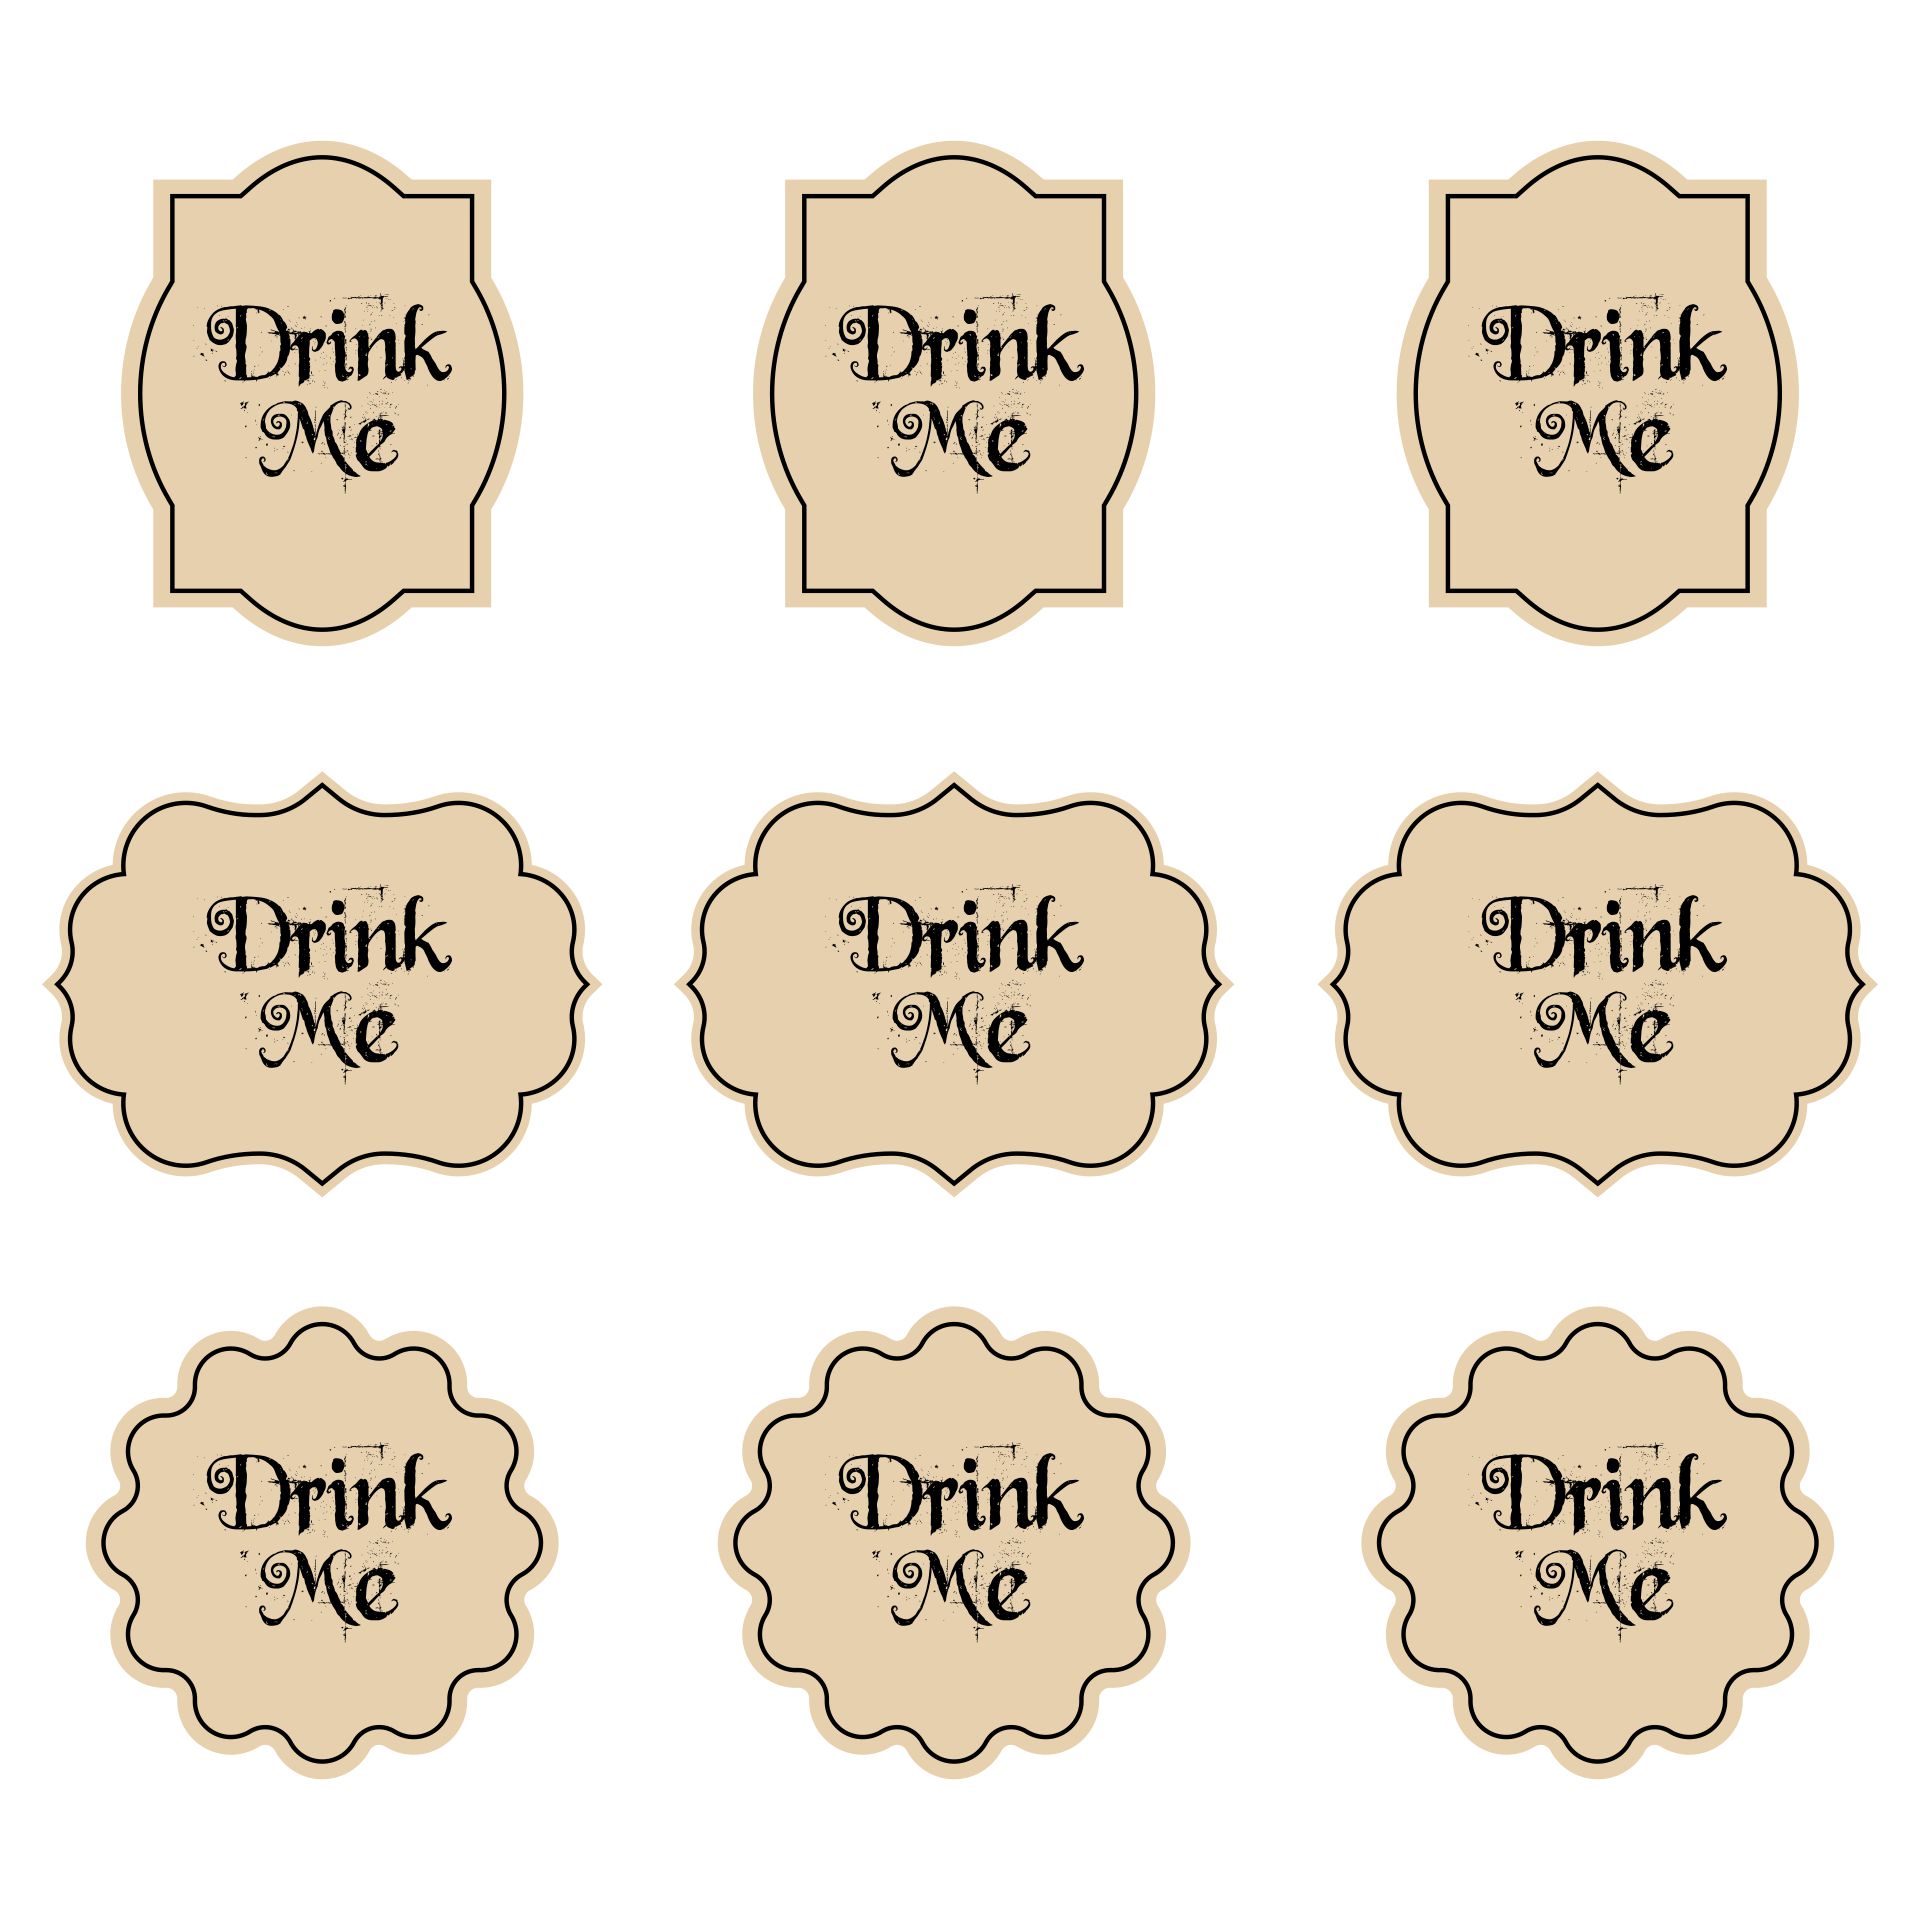 7 Best Images Of Eat Me Drink Me Printable Templates Free Printable 